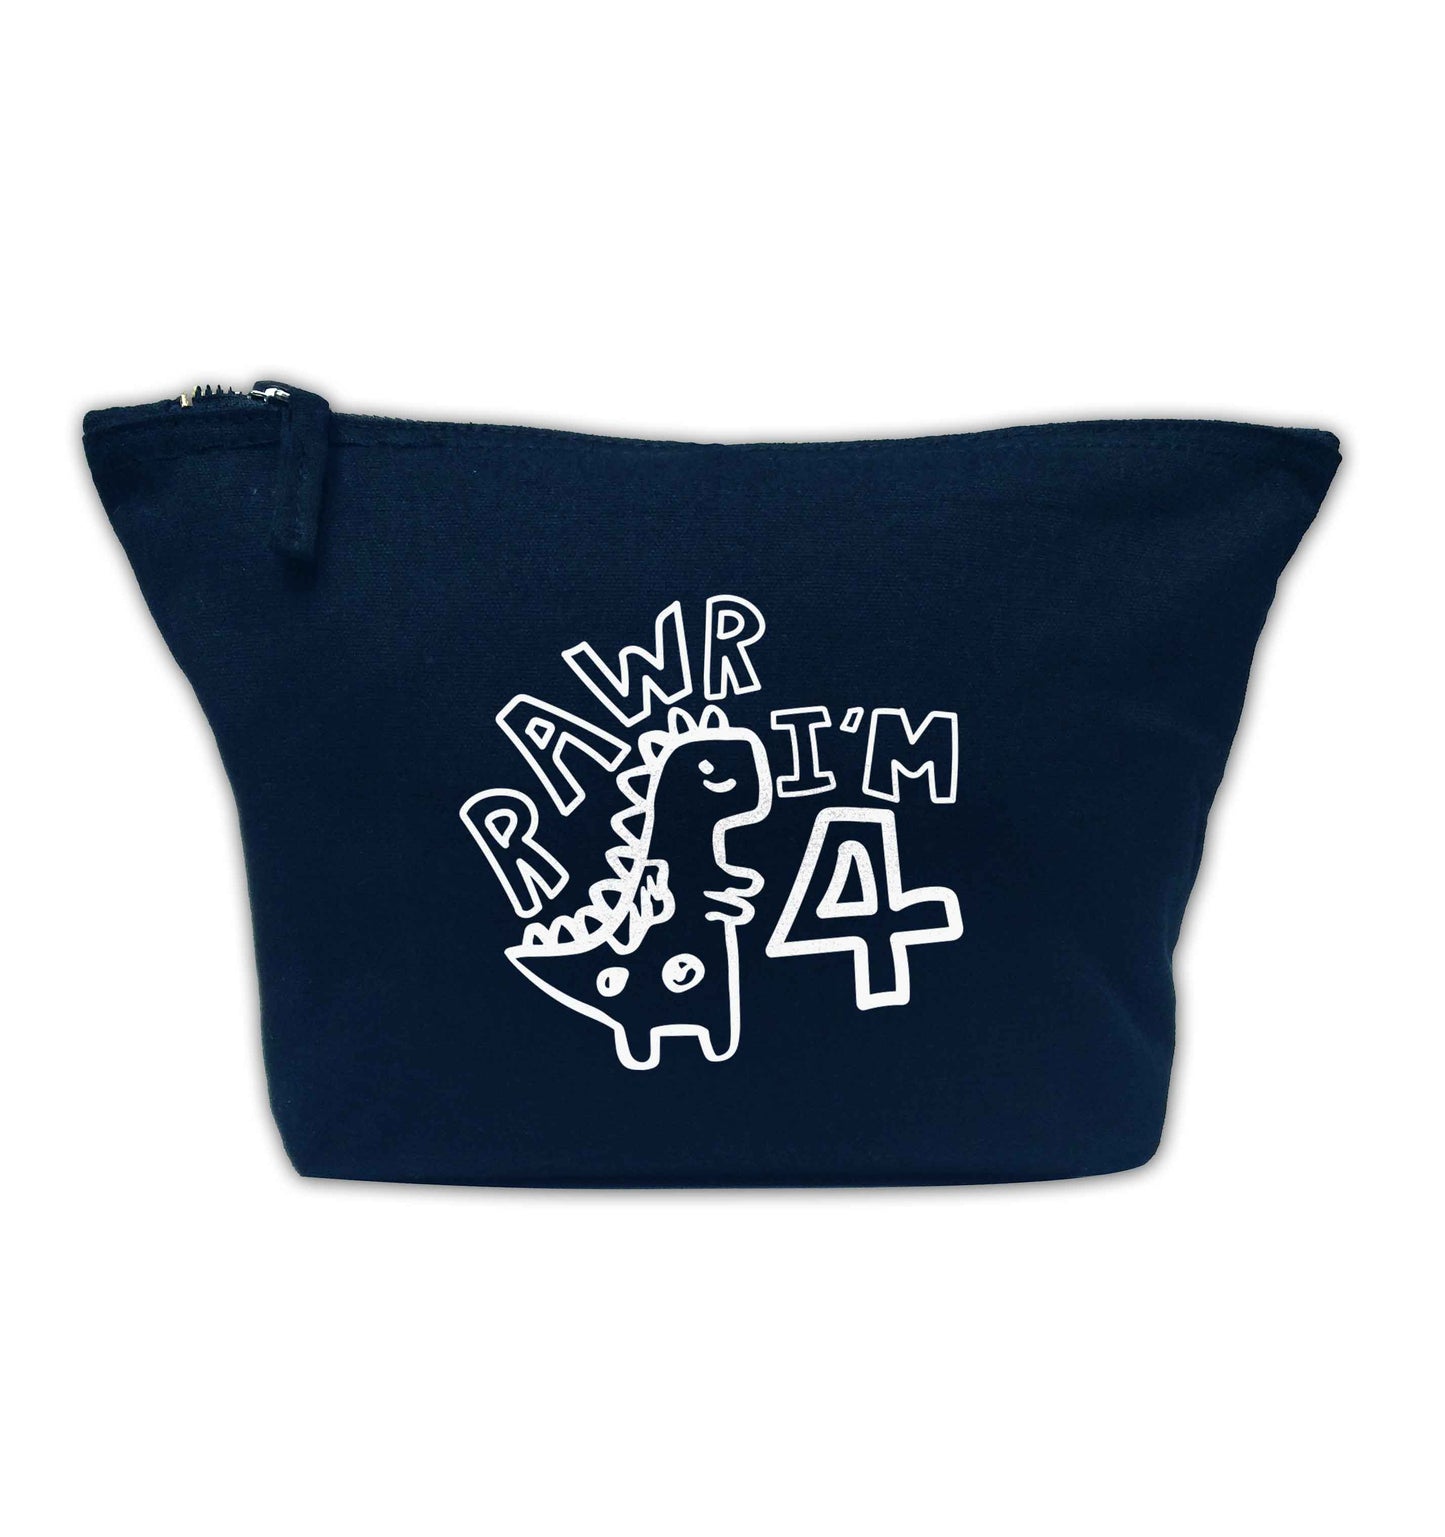 Rawr I'm four - personalise with ANY age! navy makeup bag